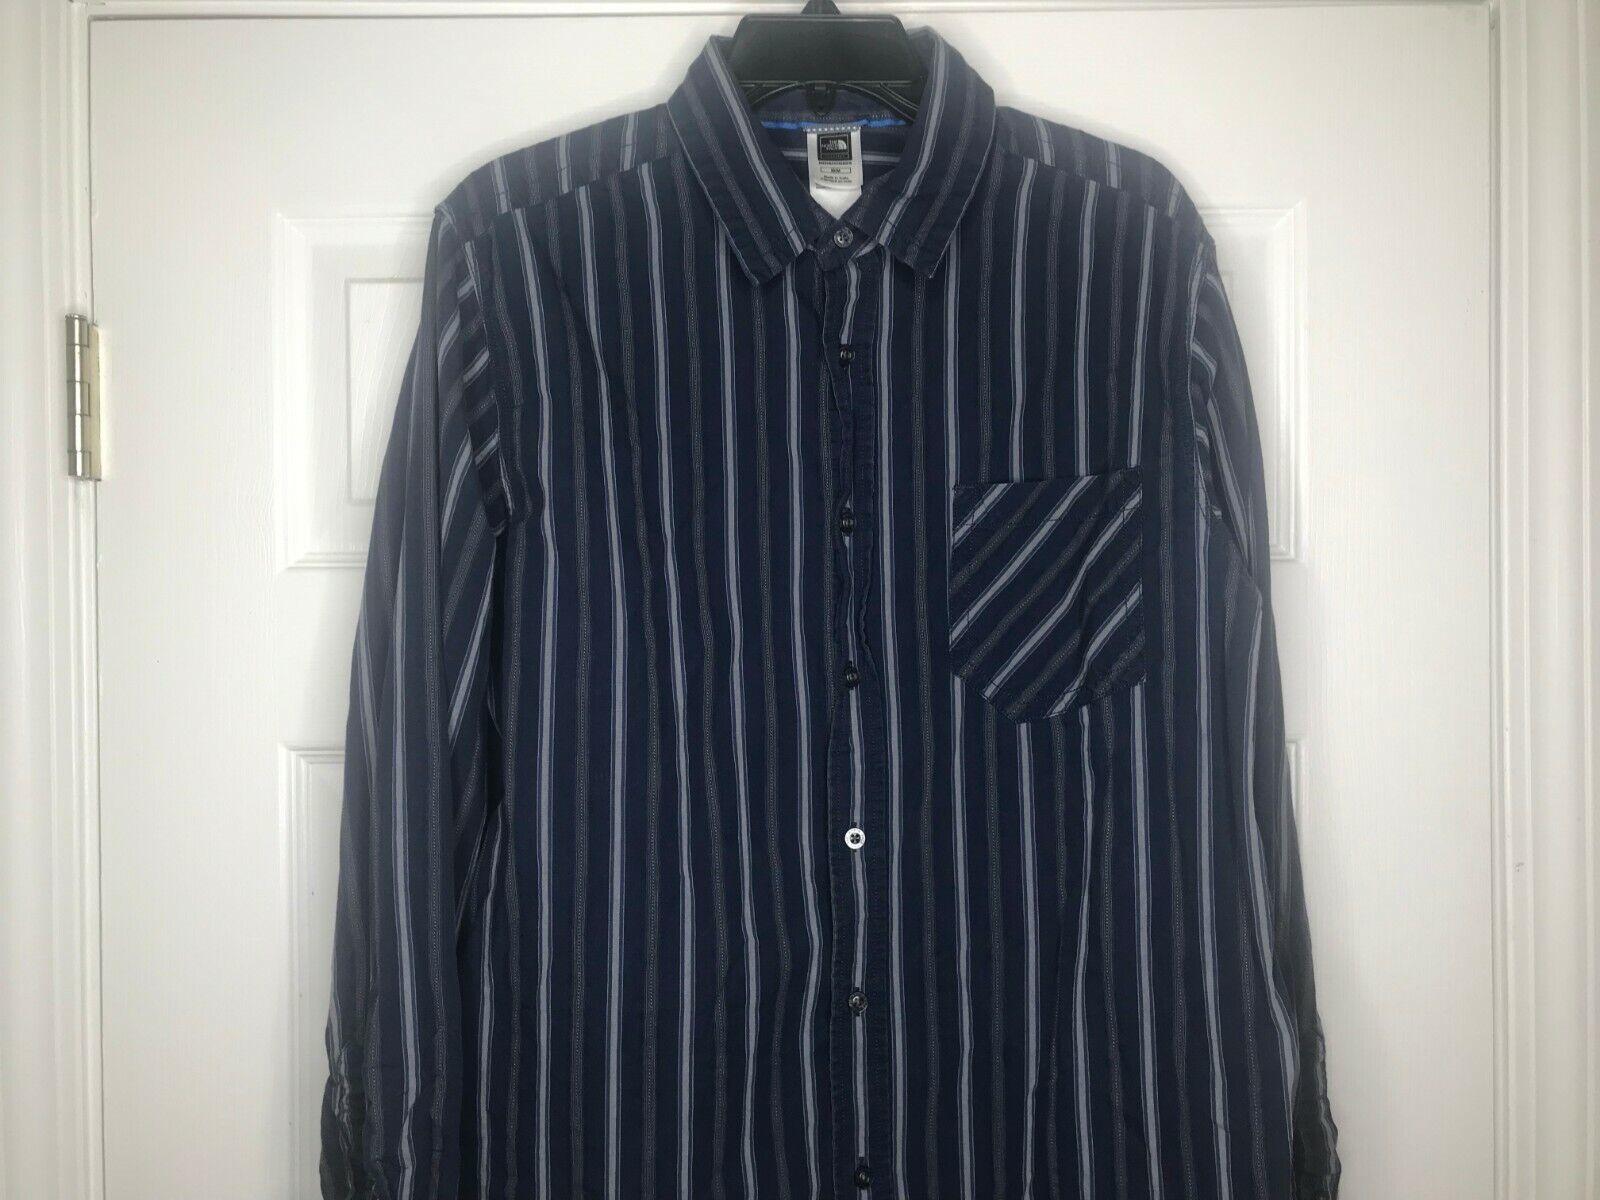 Primary image for The North Face Shirt Size Medium Blue Striped Mens Long Sleeve Button Front